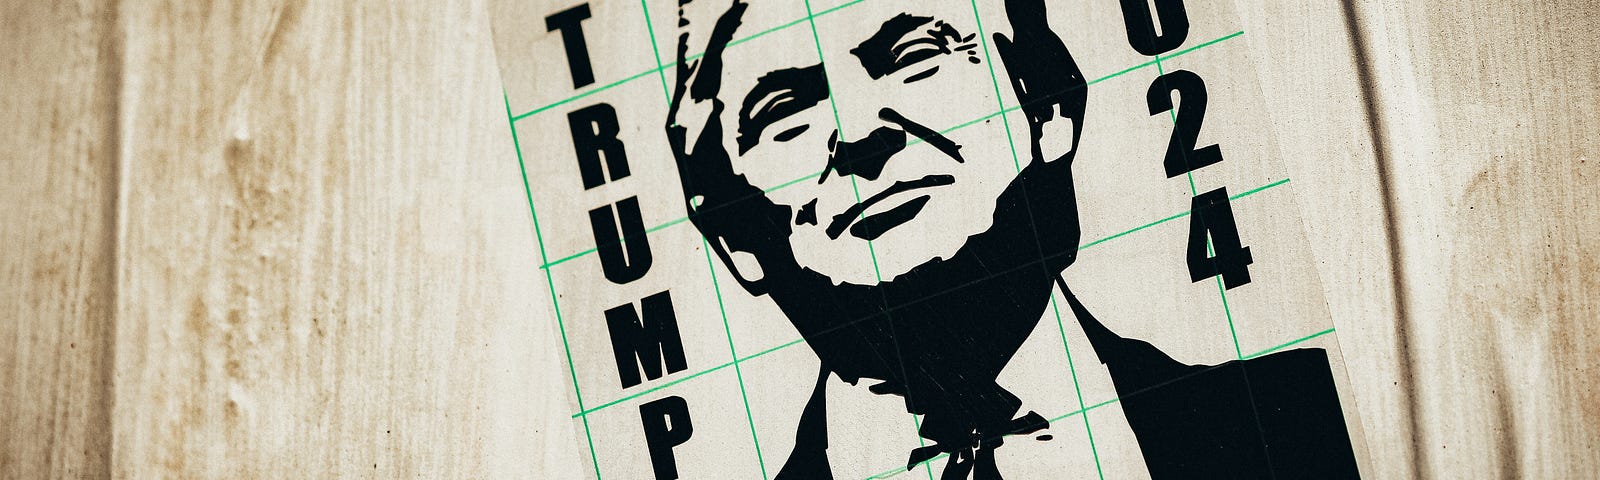 Wood surface with poster in black and white, with the words “TRUMP 2024” printed on it.